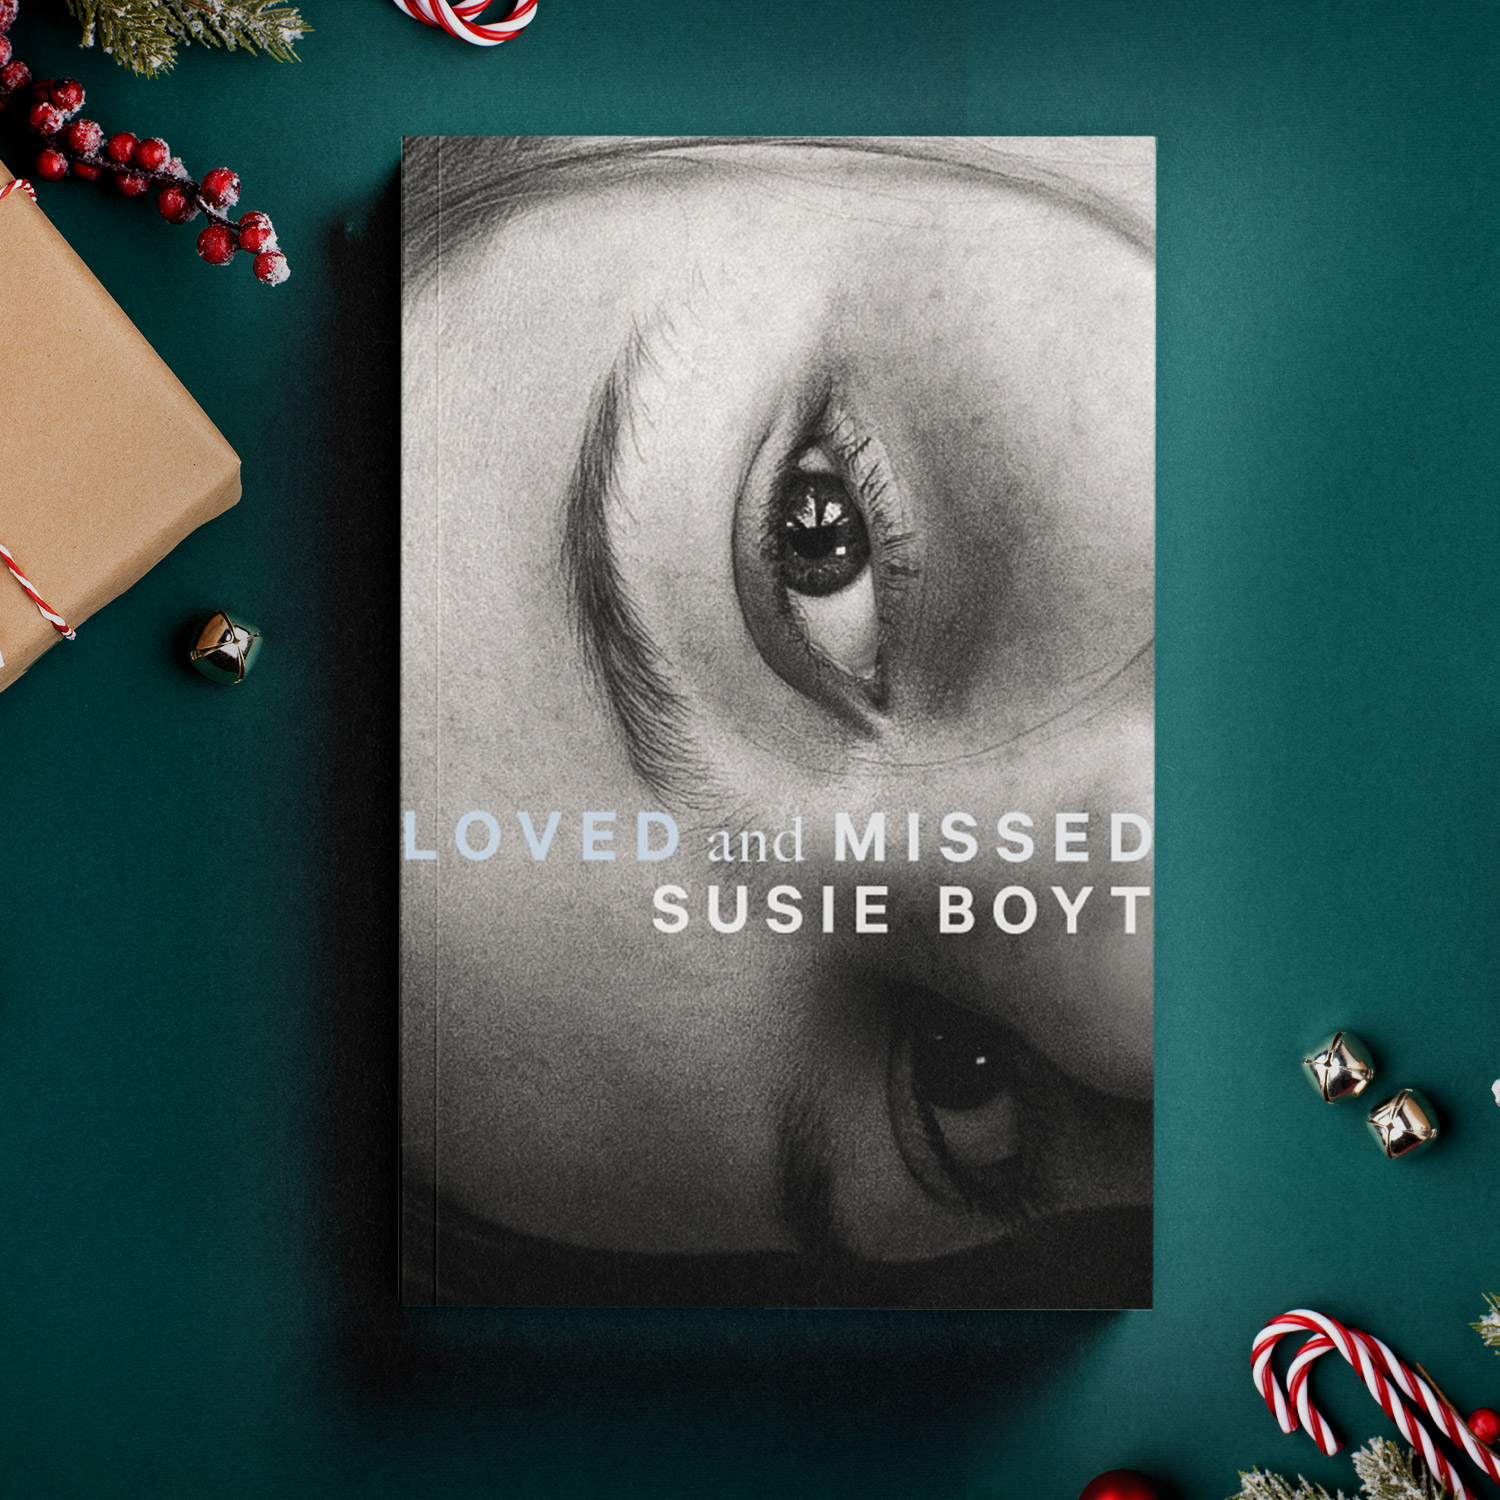 Loved and Missed by Susie Boyt